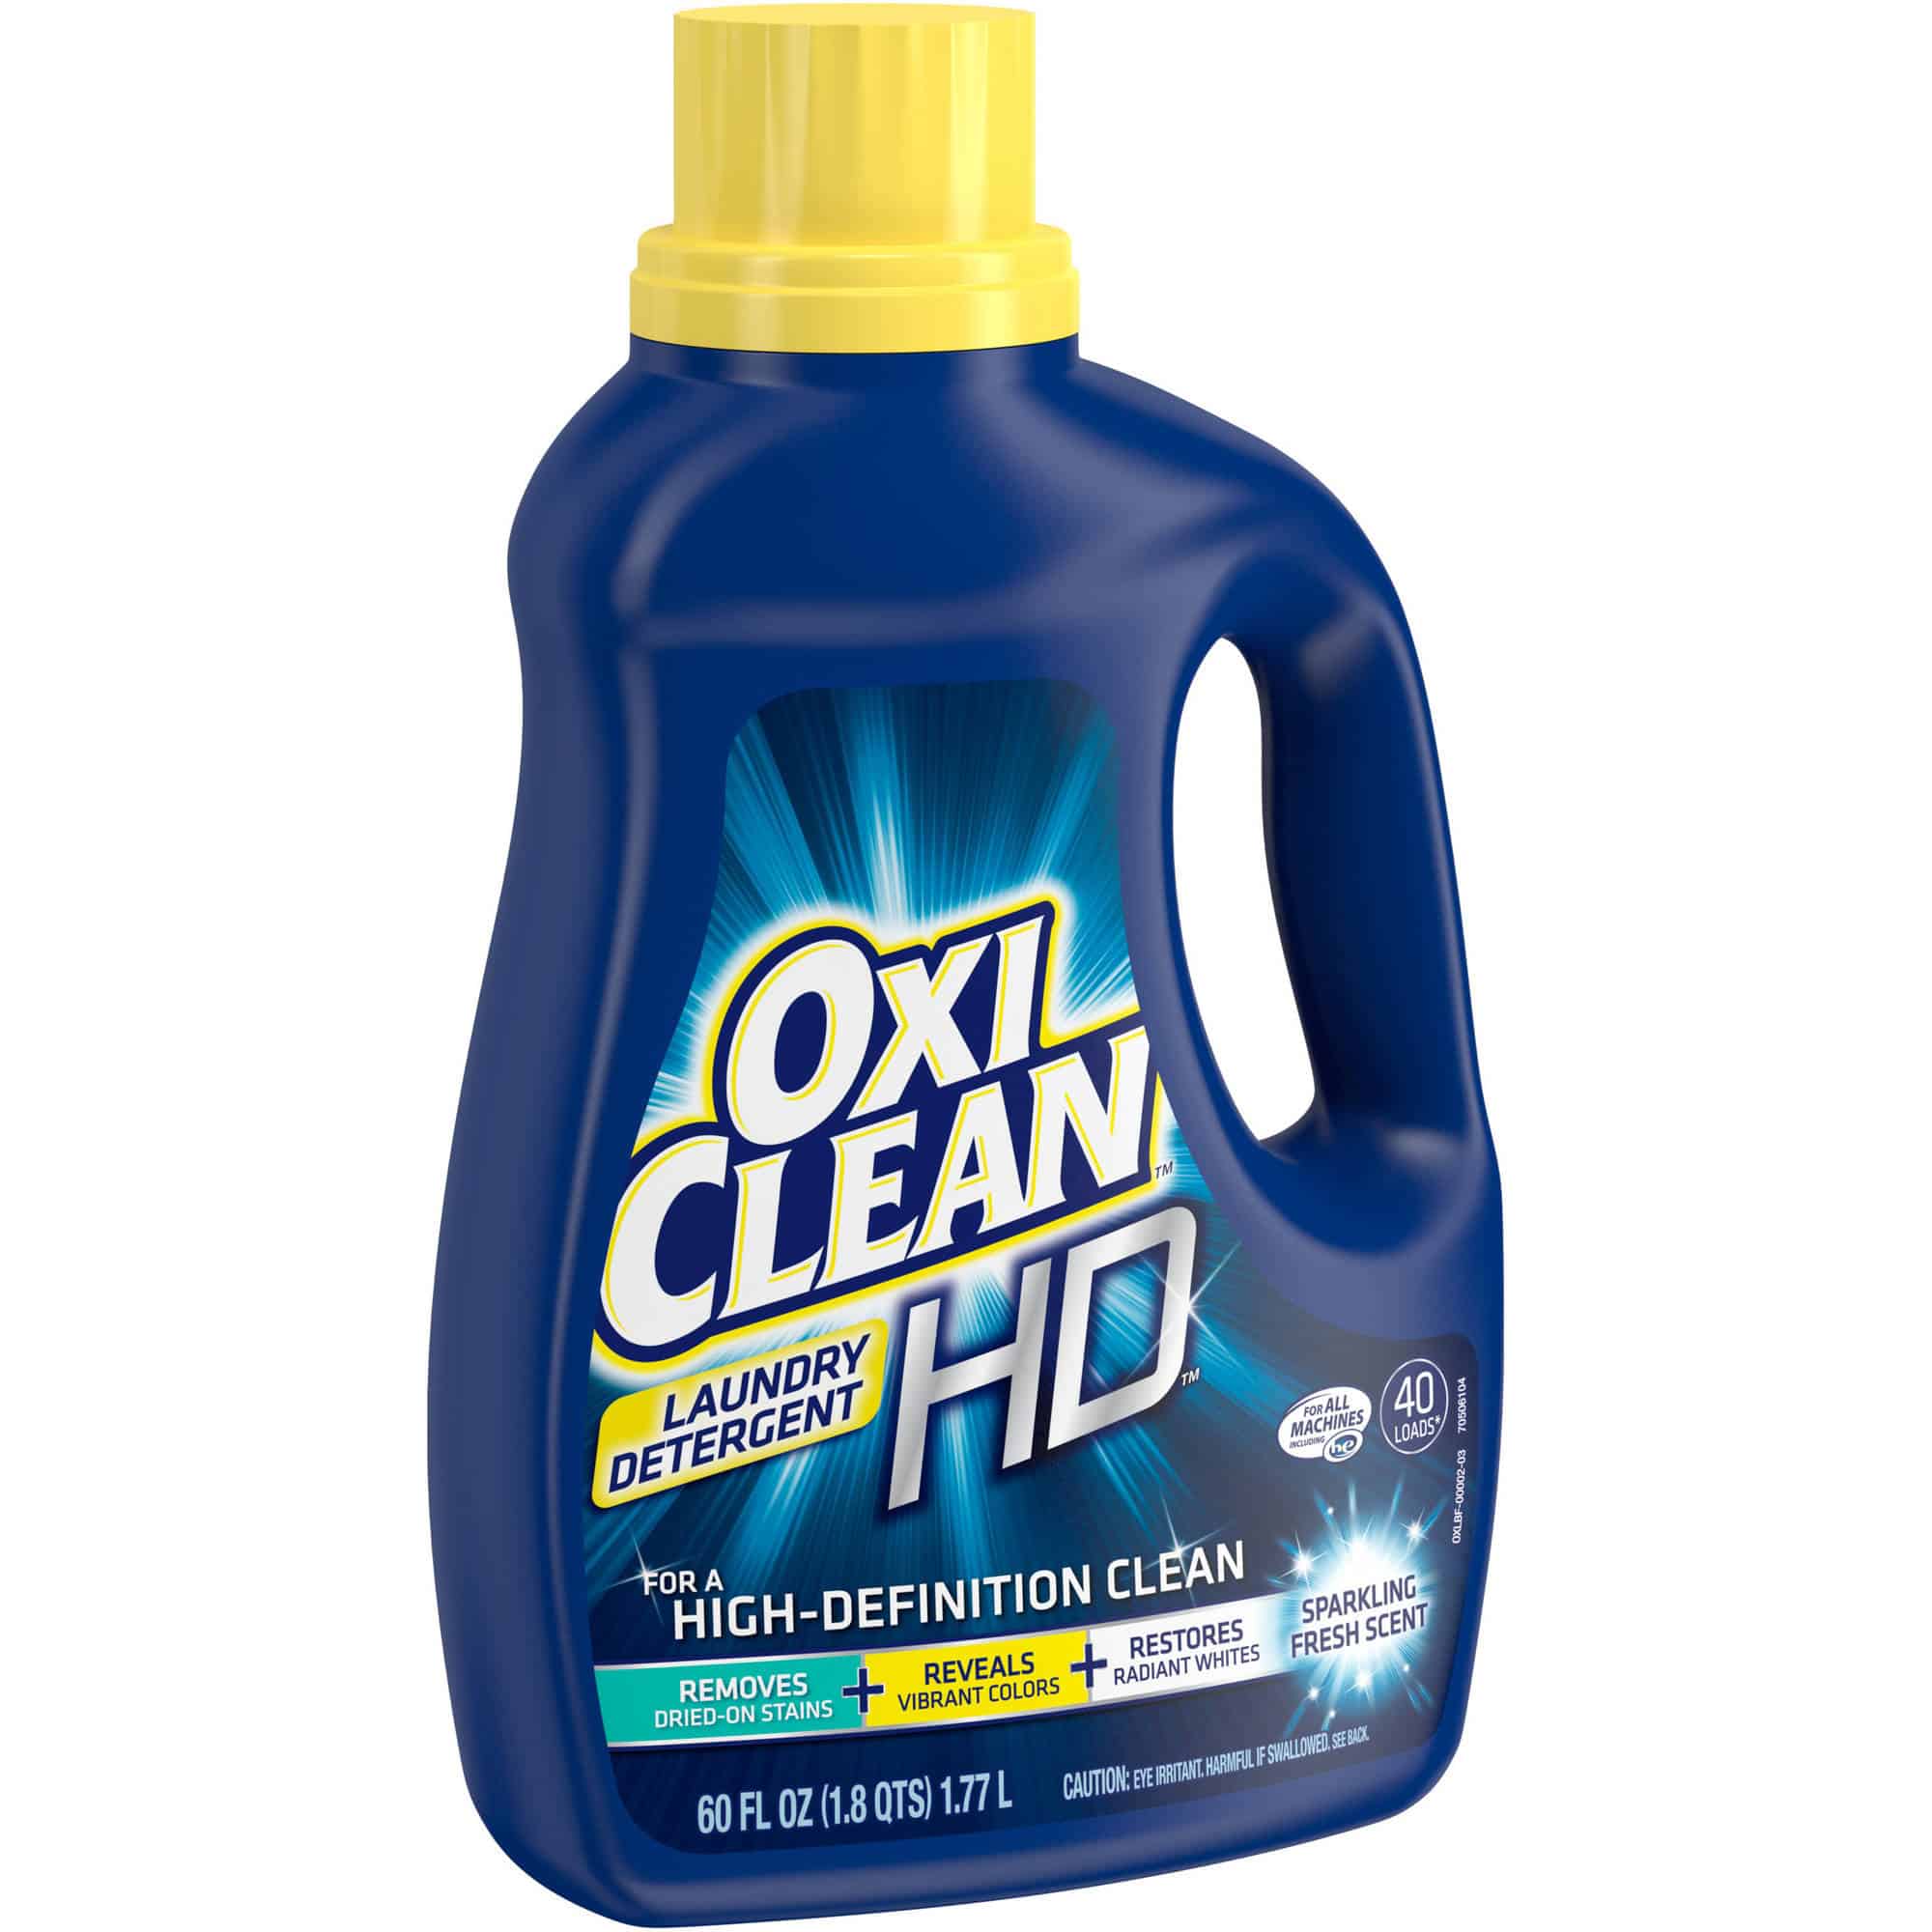 OxiClean Laundry Detergent 